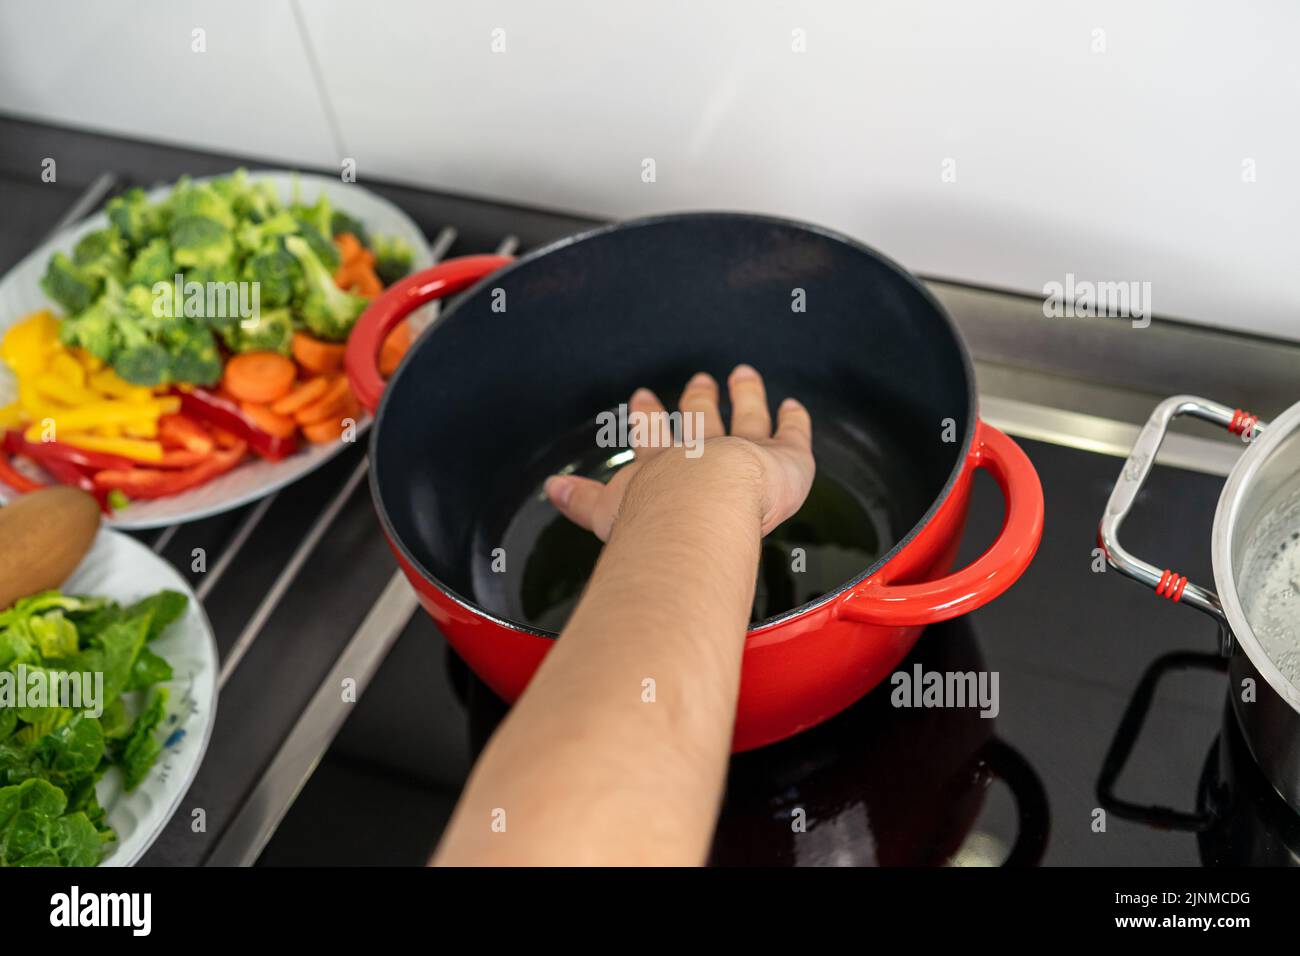 Hand controlling the temperature of the pot Stock Photo